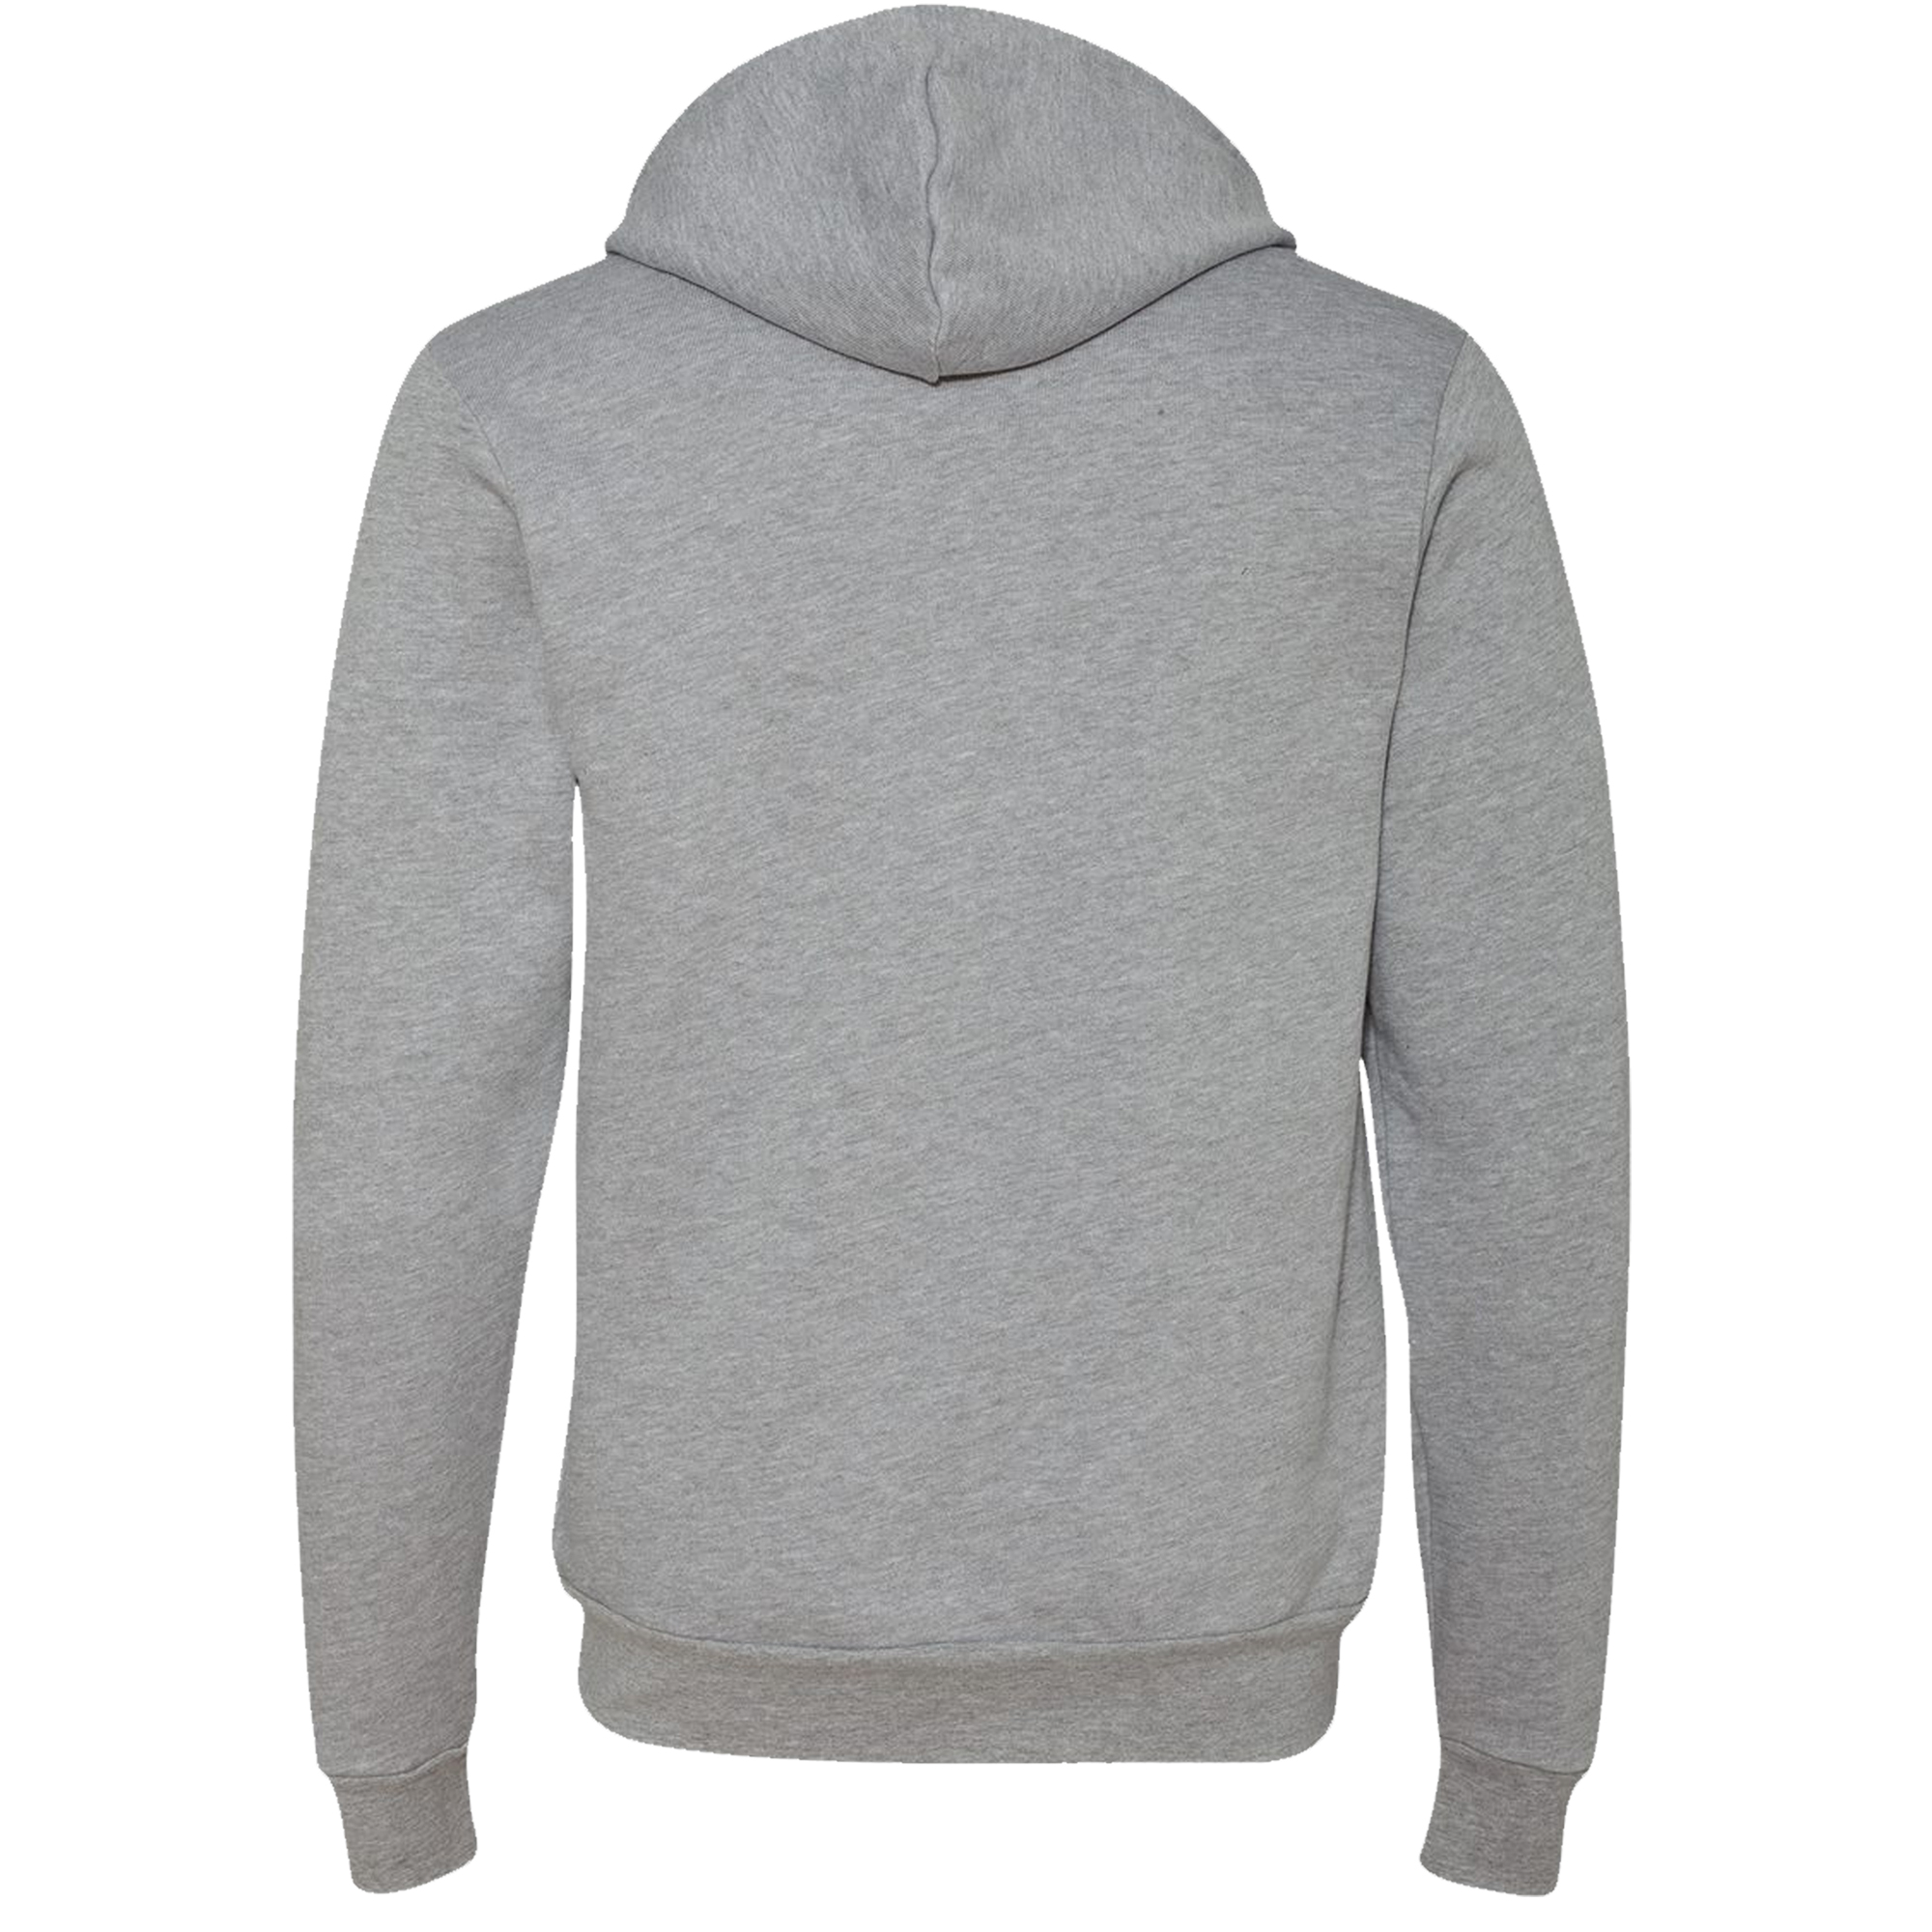 Rocksteady Running - Collective Hoodie - Athletic Heather